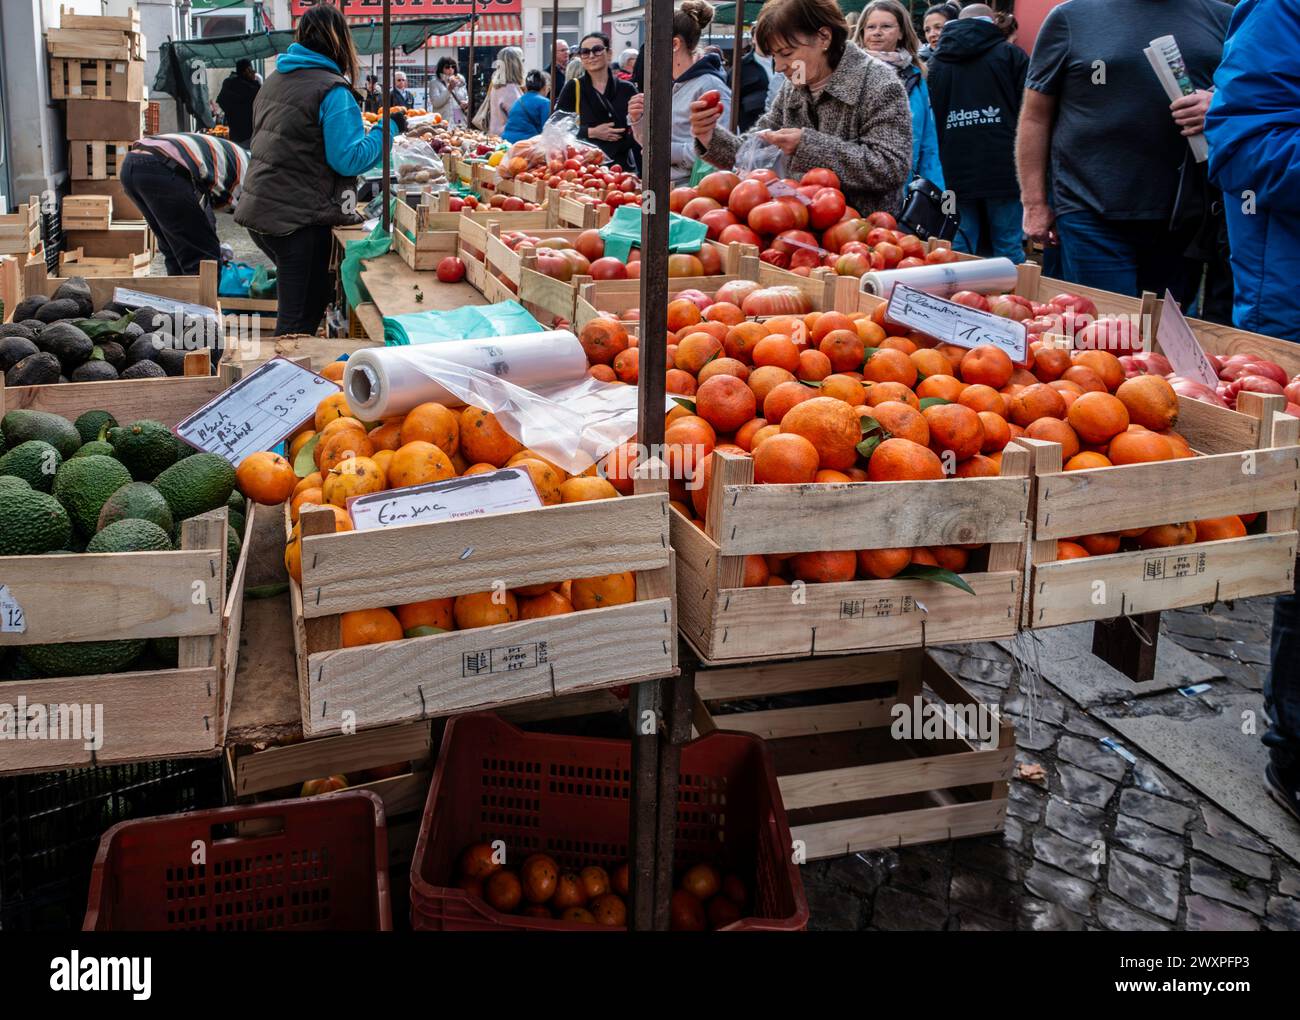 Shopping for fruit and vegetables in Loule Market, Portugal. Stock Photo